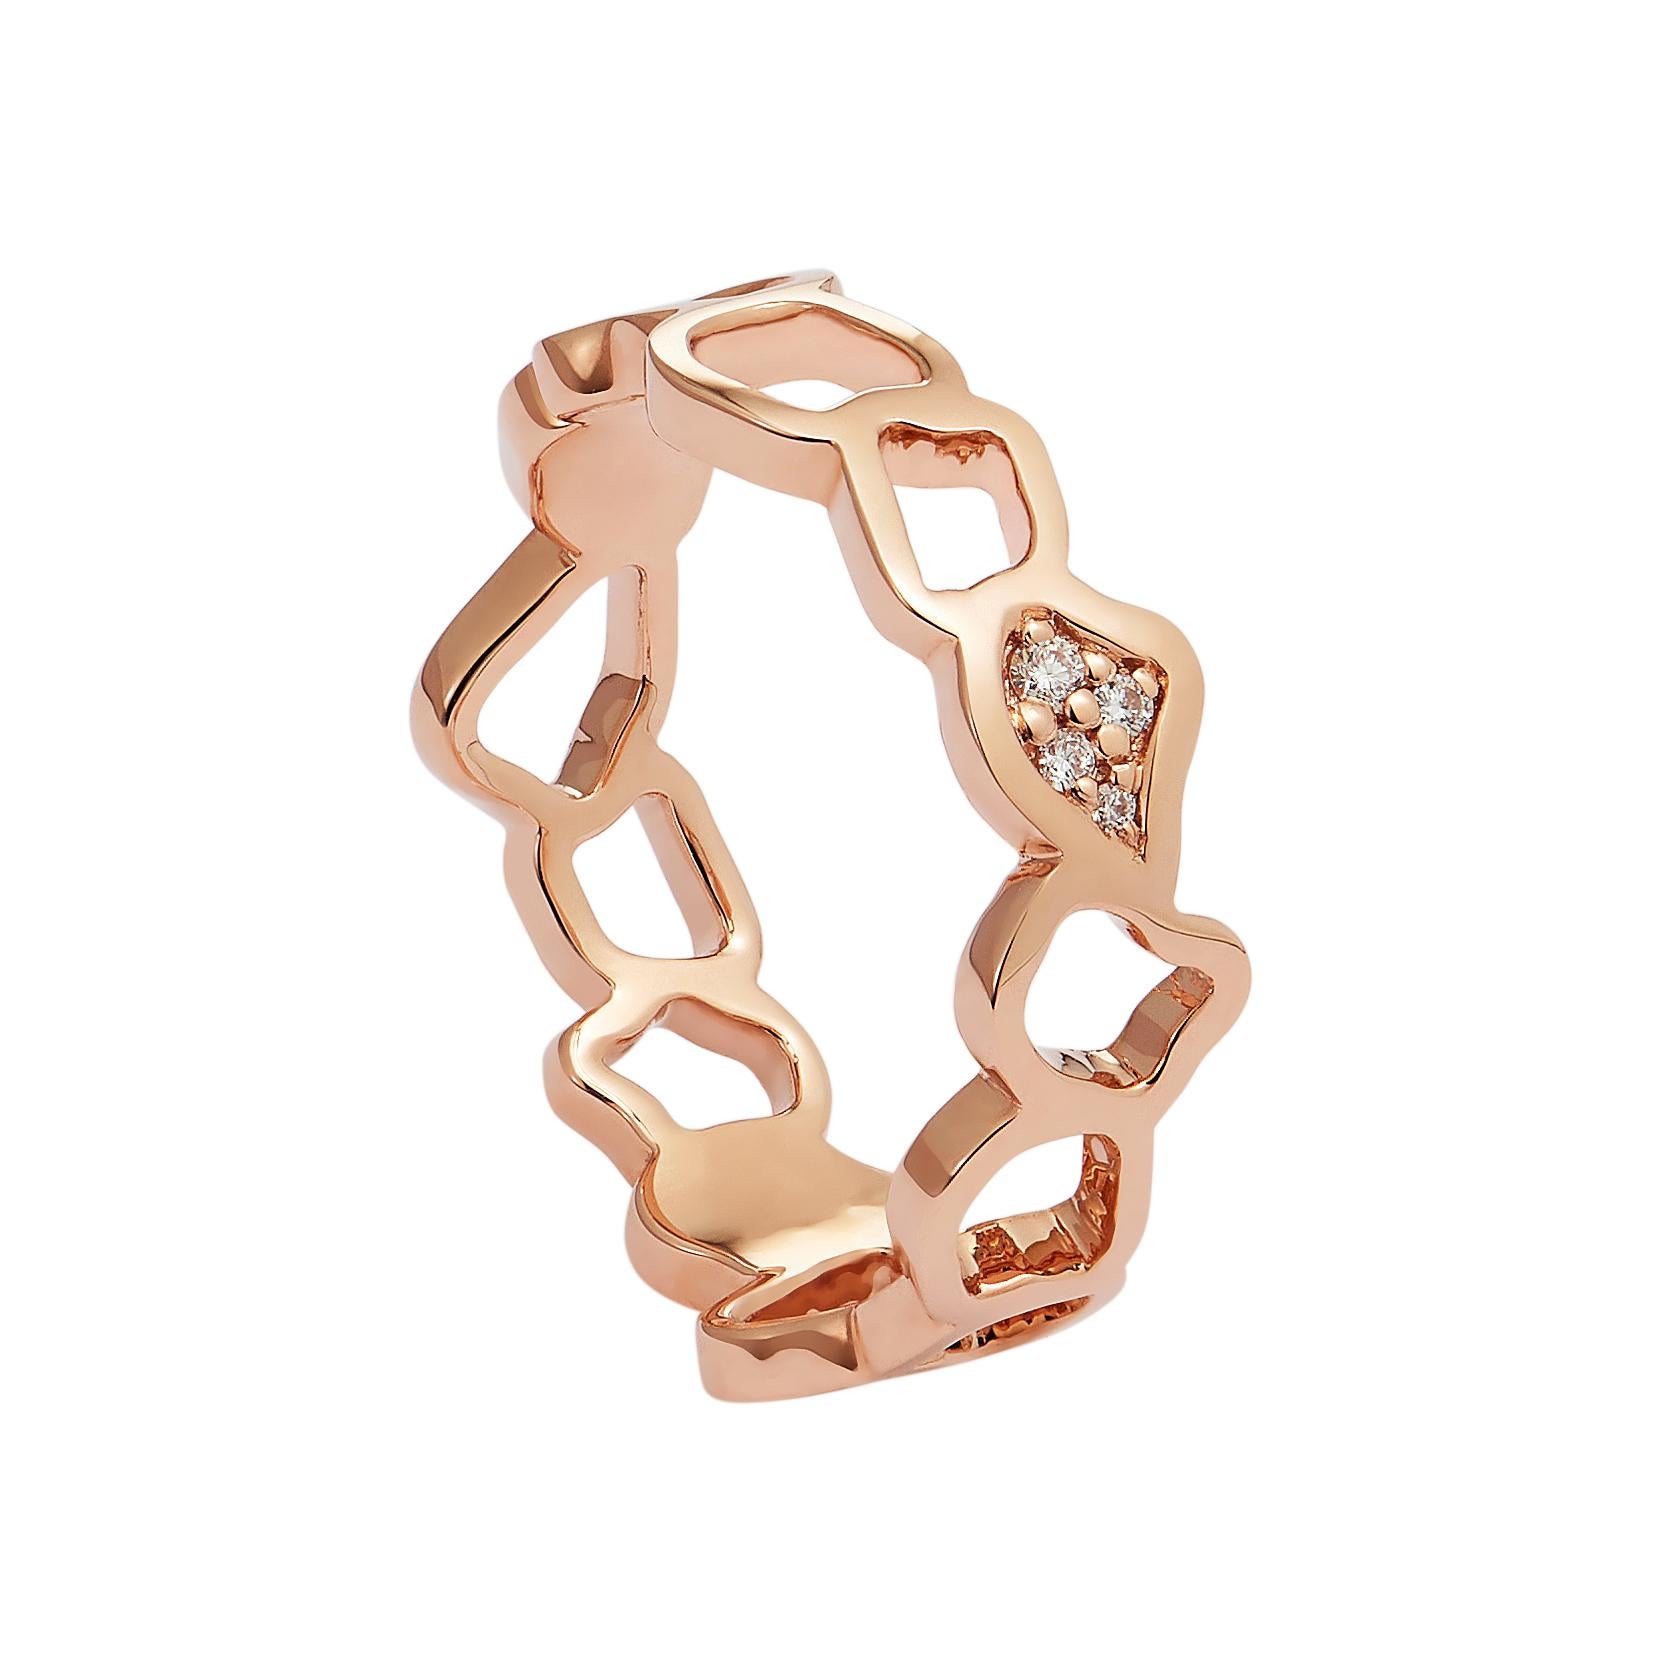 18 Karat Rose Gold Band Ring Set With Diamonds

This eye-catching rose gold ring is perfect for everyday wear and will no doubt attract attention. Part of the Twiga collection, it features intricate detail resembling the giraffe's spots and has an